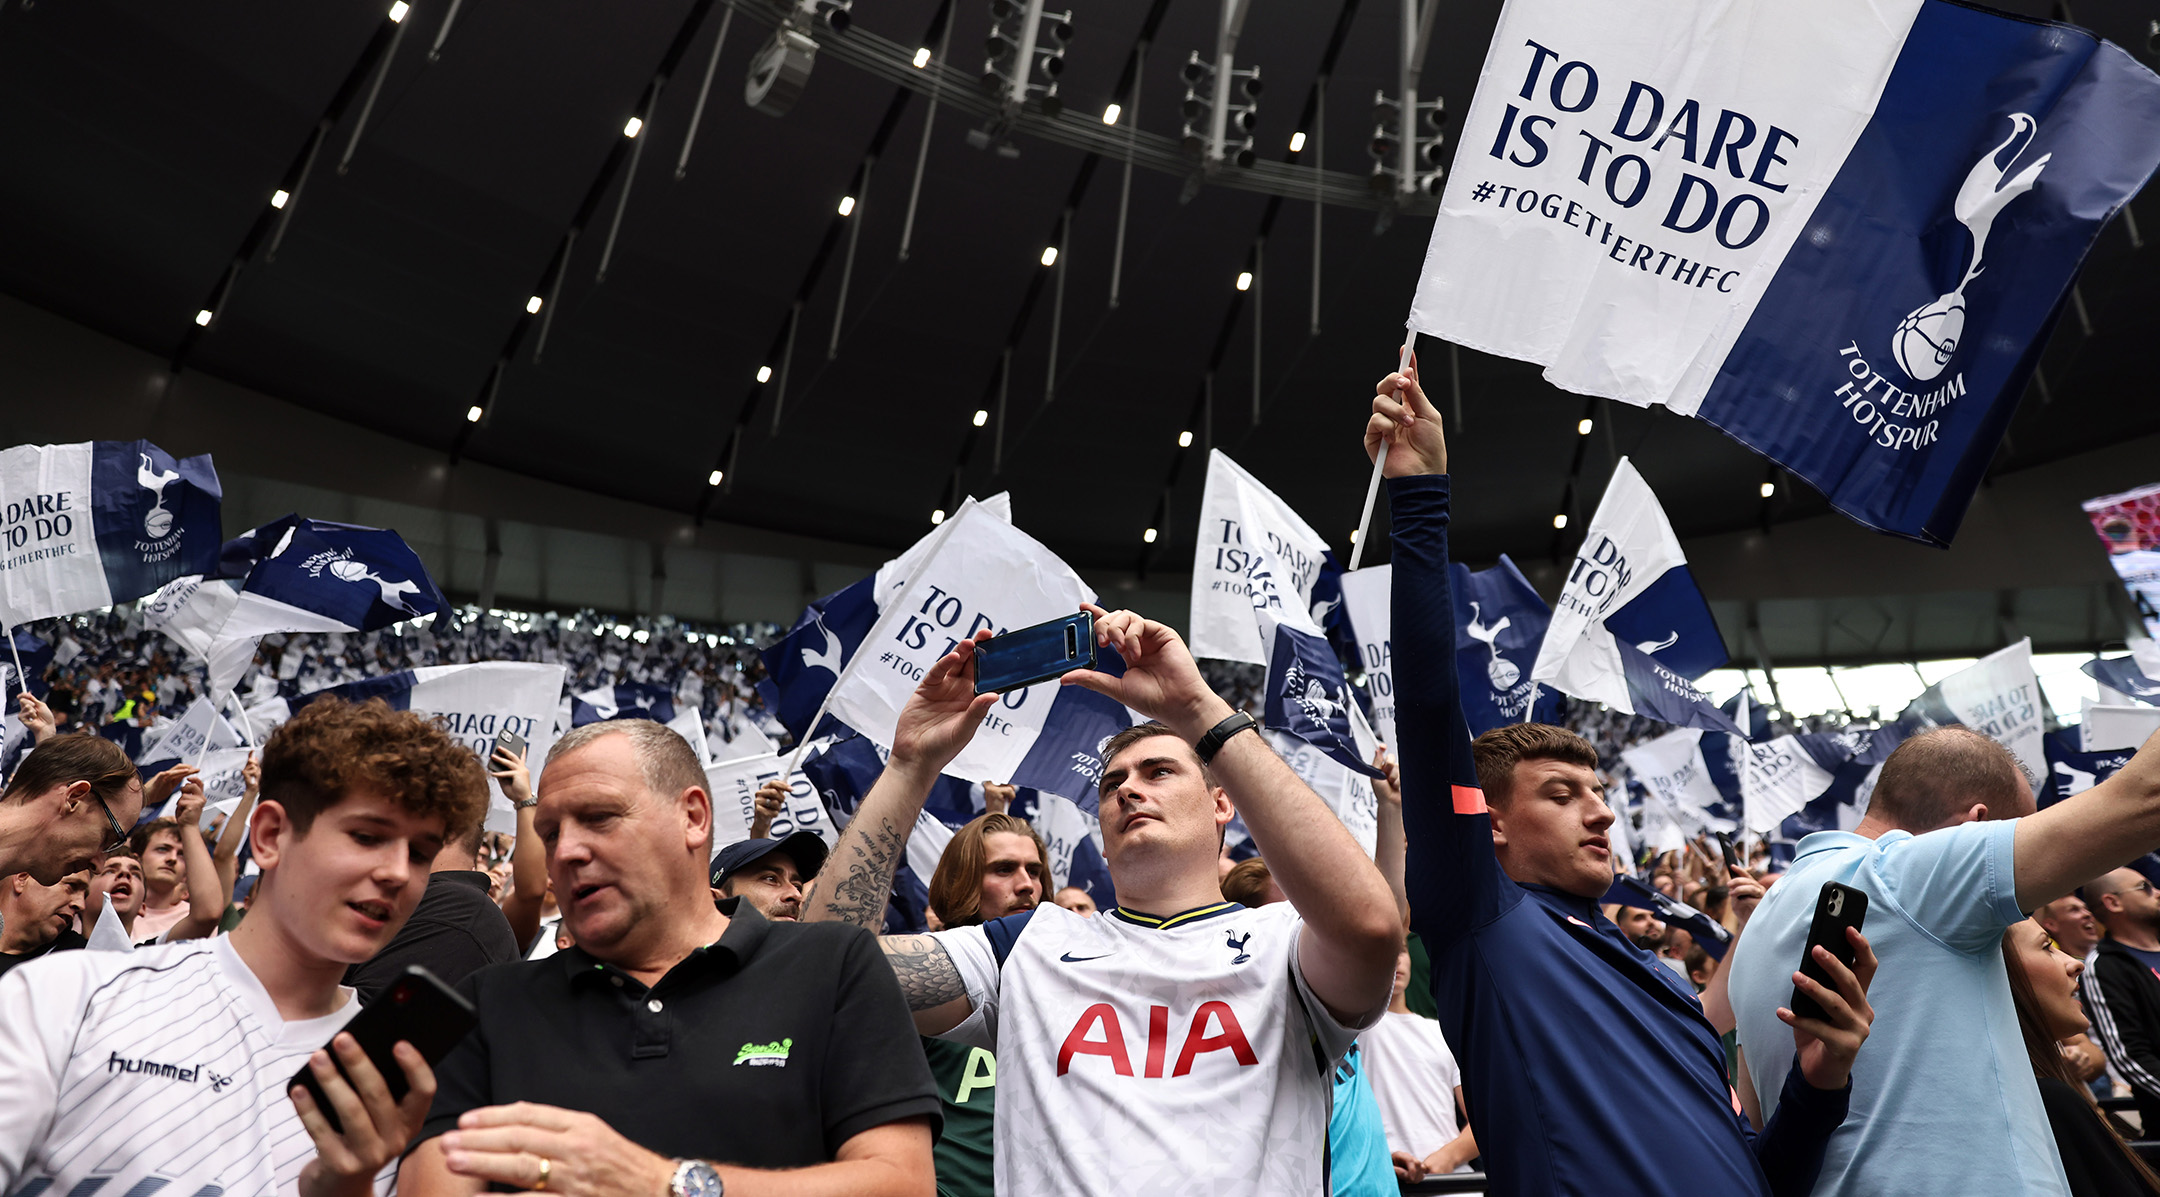 Tottenham Hotspur fans have long called themselves 'Yids.' This week, the  British soccer team asked them to stop. - Jewish Telegraphic Agency